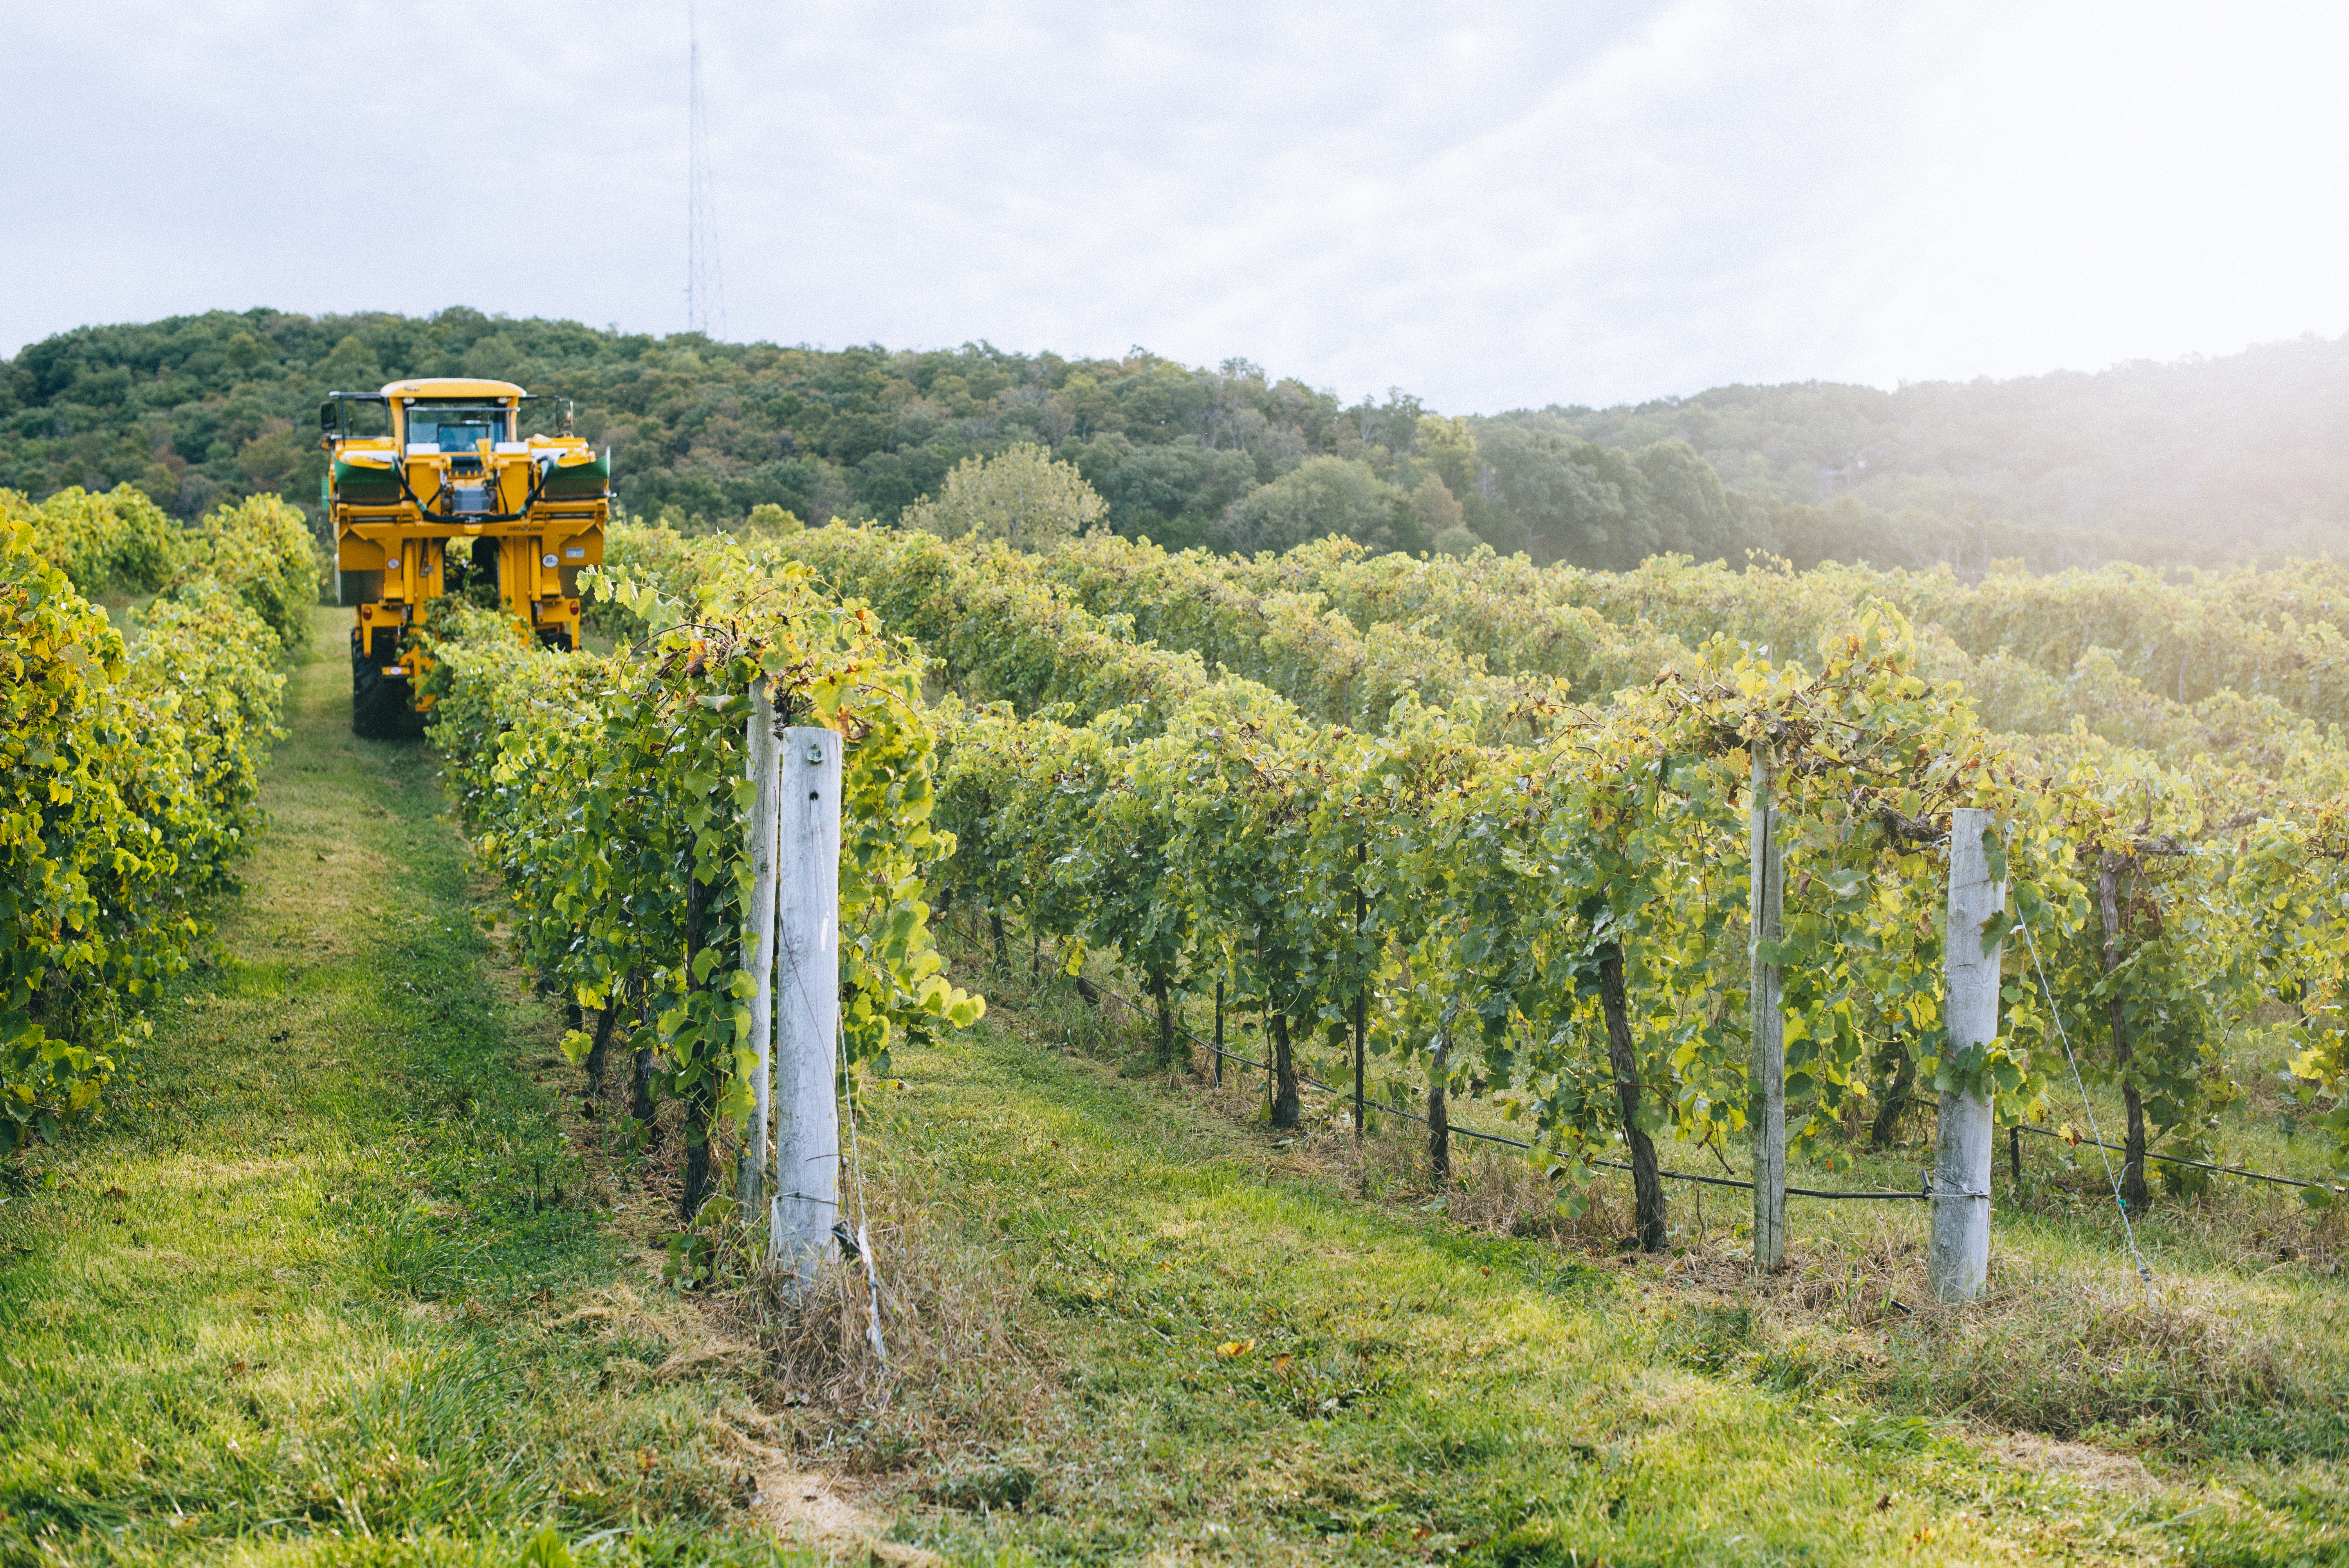 Grapes being harvested